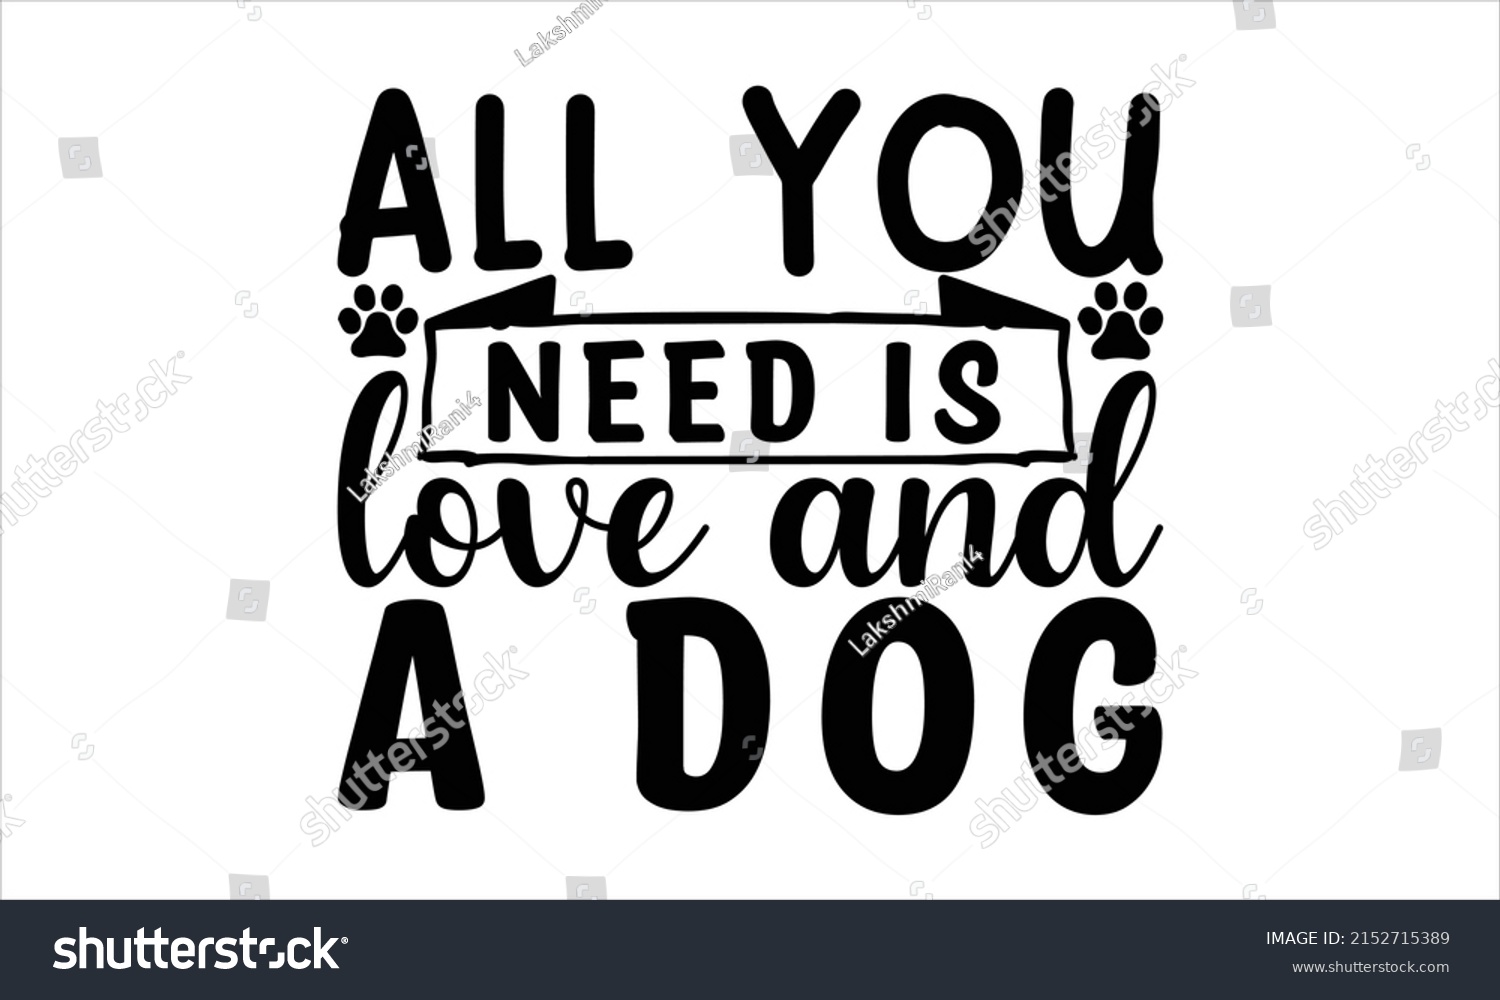 SVG of All you need is love and a dog -   Lettering design for greeting banners, Mouse Pads, Prints, Cards and Posters, Mugs, Notebooks, Floor Pillows and T-shirt prints design.
 svg